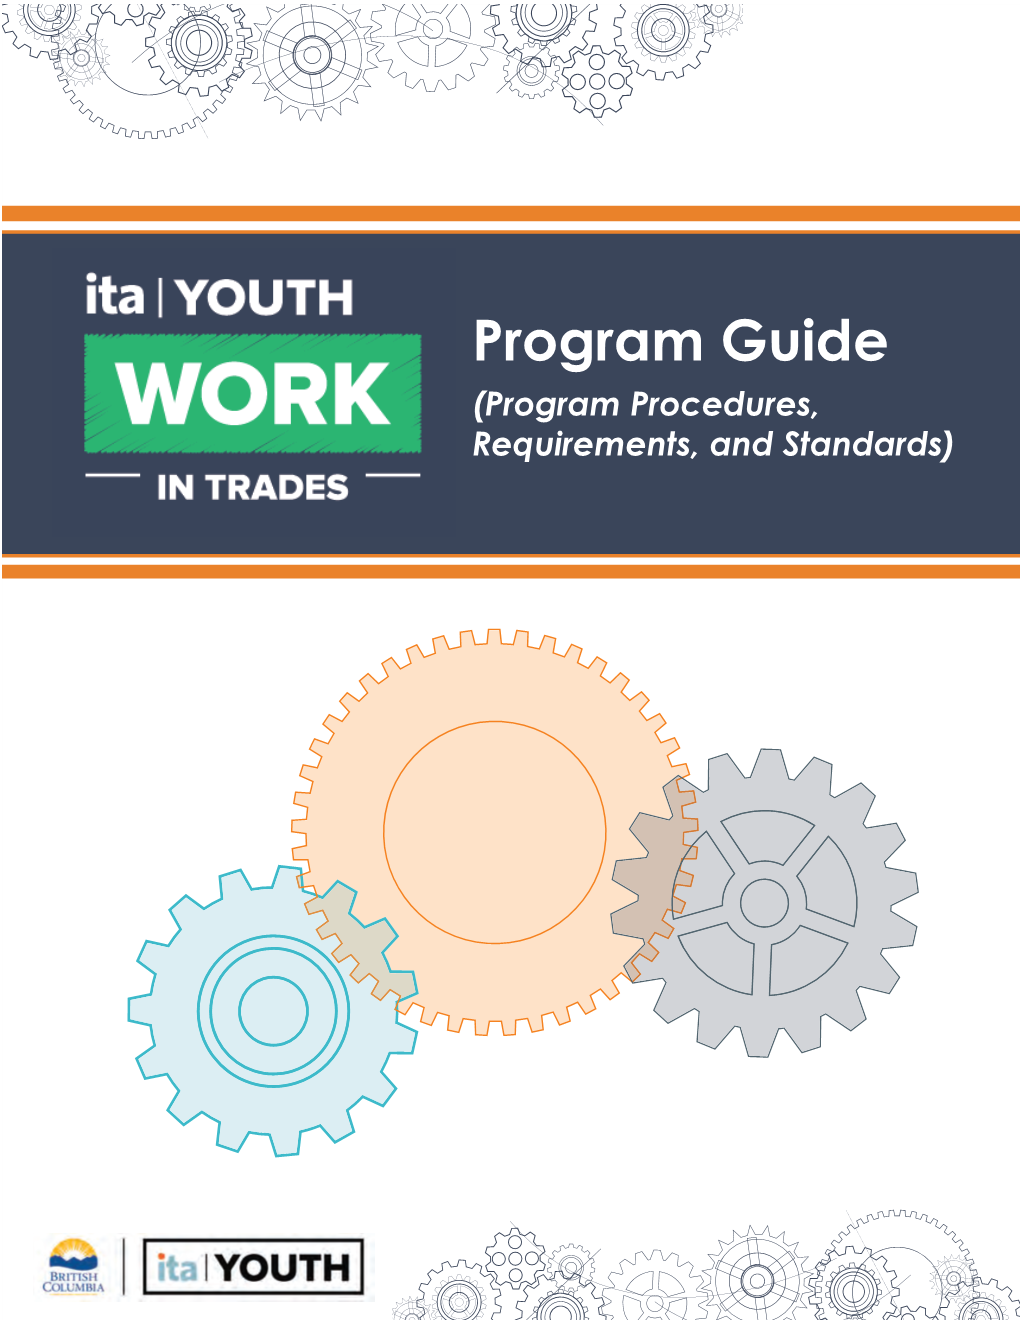 Ita Youth Work in Trades Program Guide